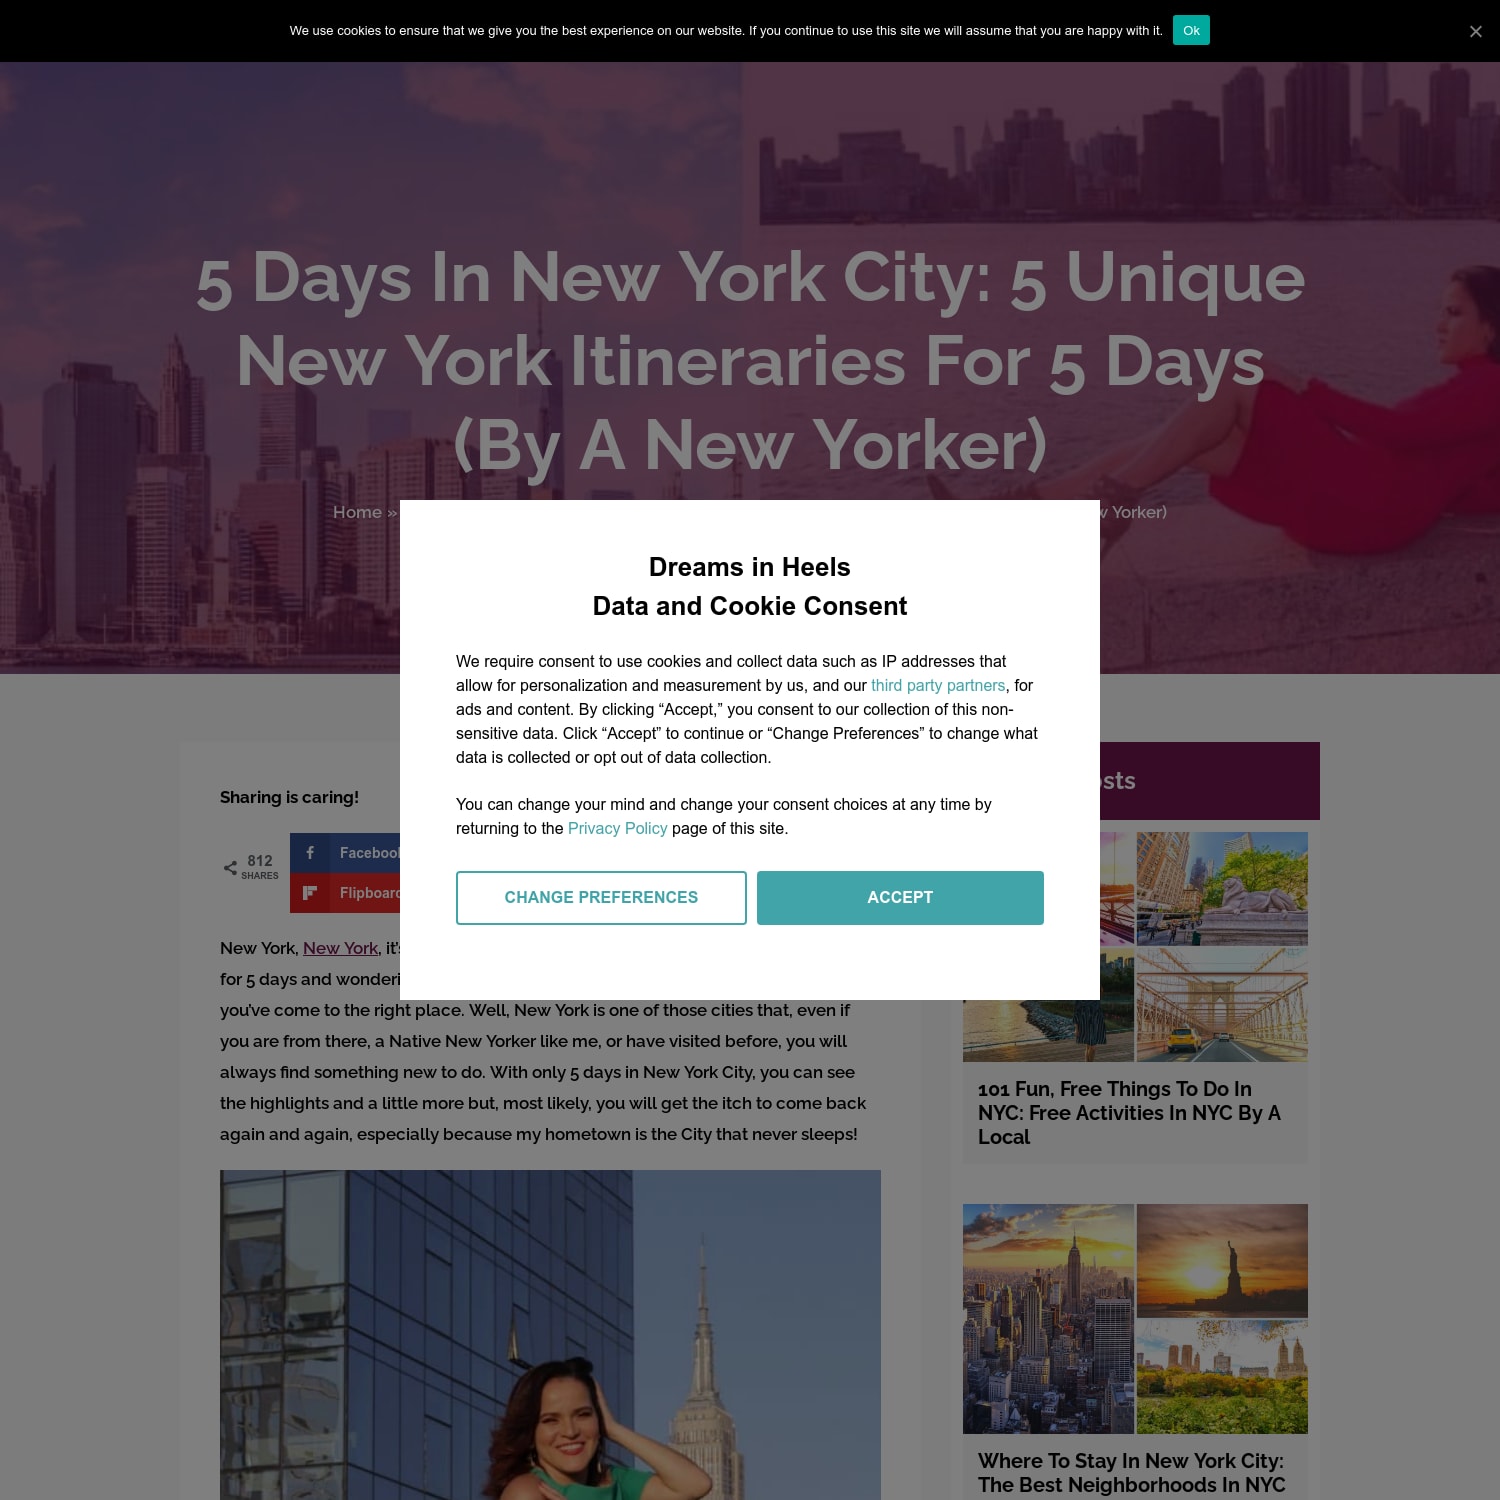 5 days in New York City: 5 unique New York itineraries for 5 days (by a New Yorker)